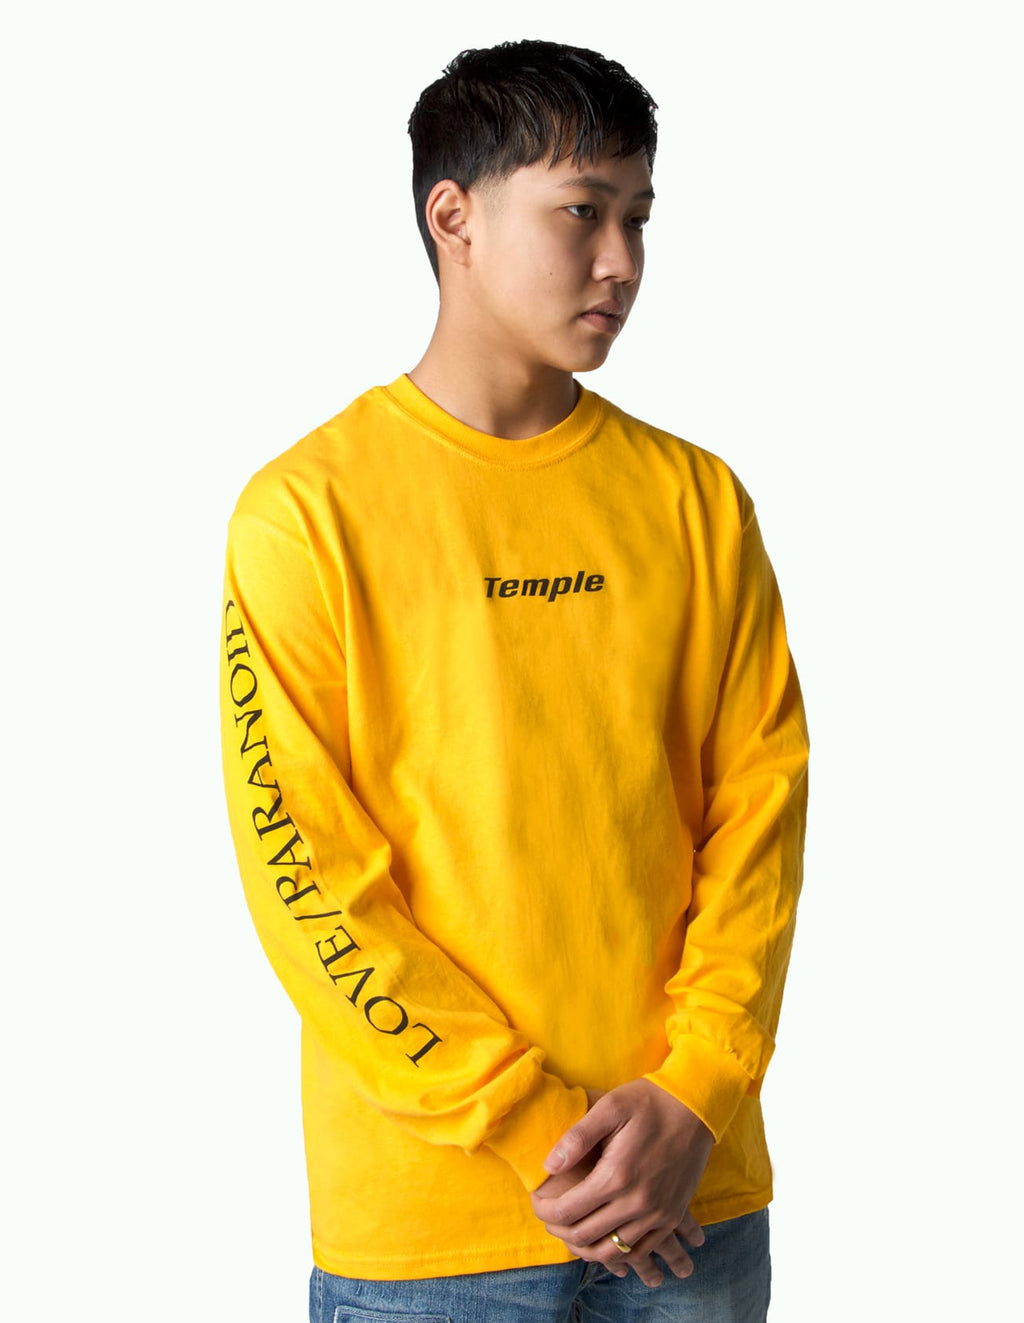 Temple Black Panther Longsleeve Tee Yellow Gold